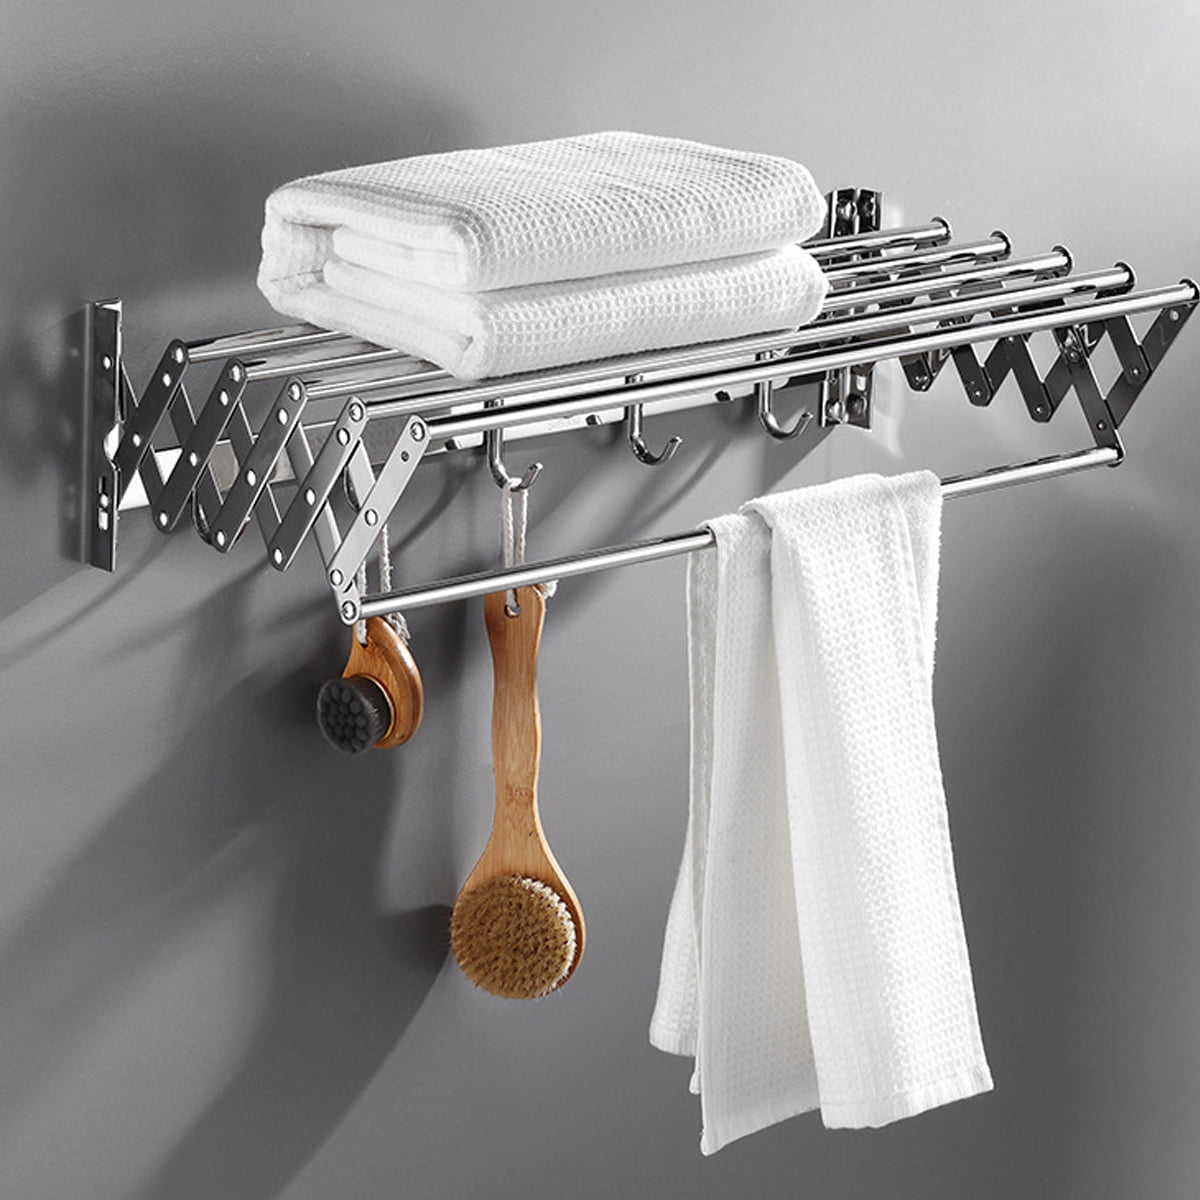 Stainless Steel Wall Mounted Bar Expandable Clothes Drying Rack Towel Stainless Steel Drying Rack Wall Mounted